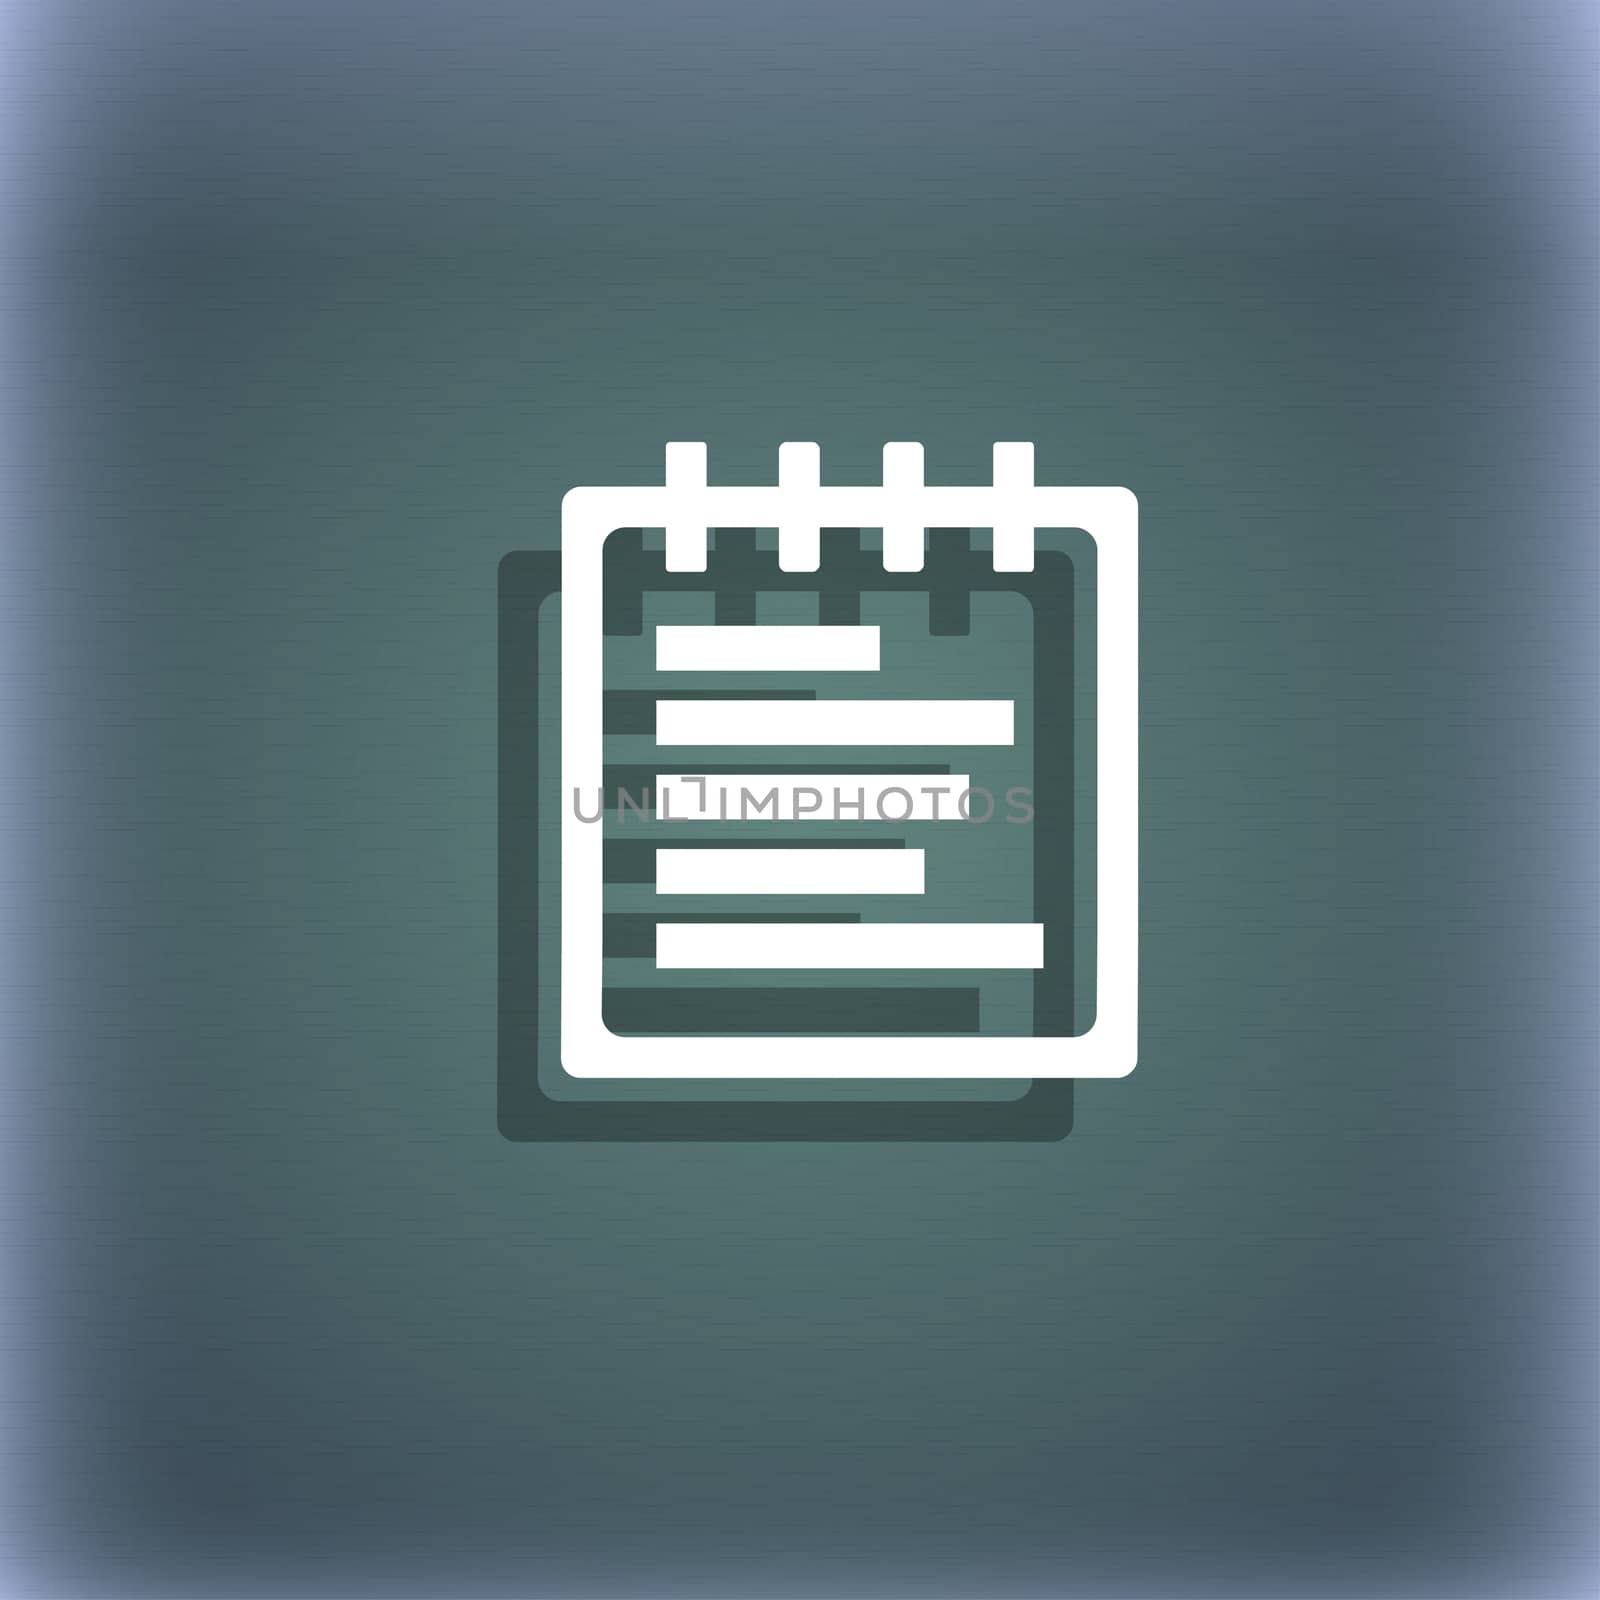 Notepad icon symbol on the blue-green abstract background with shadow and space for your text. illustration